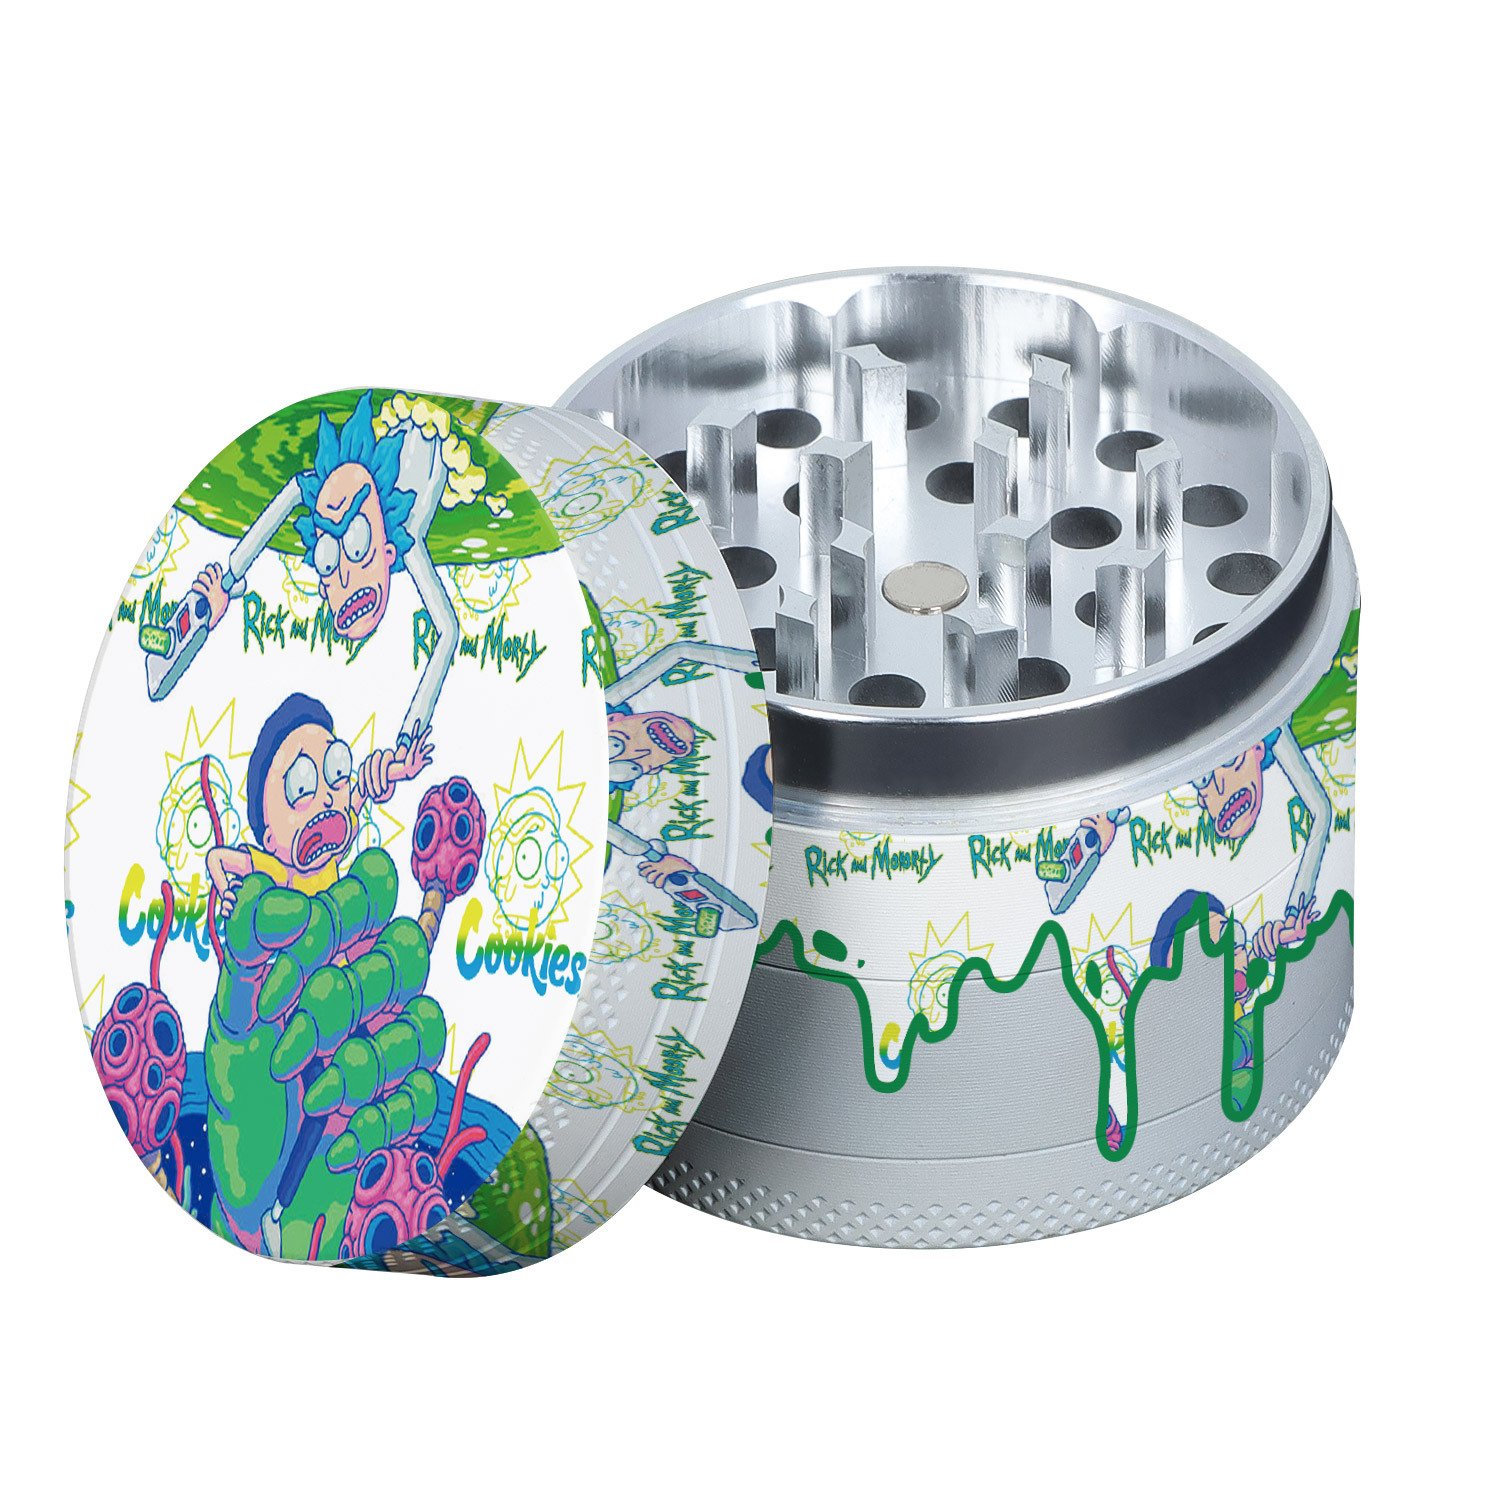 50mm Cookies Rick And Morty Grinder - MUXIANG Pipe Shop